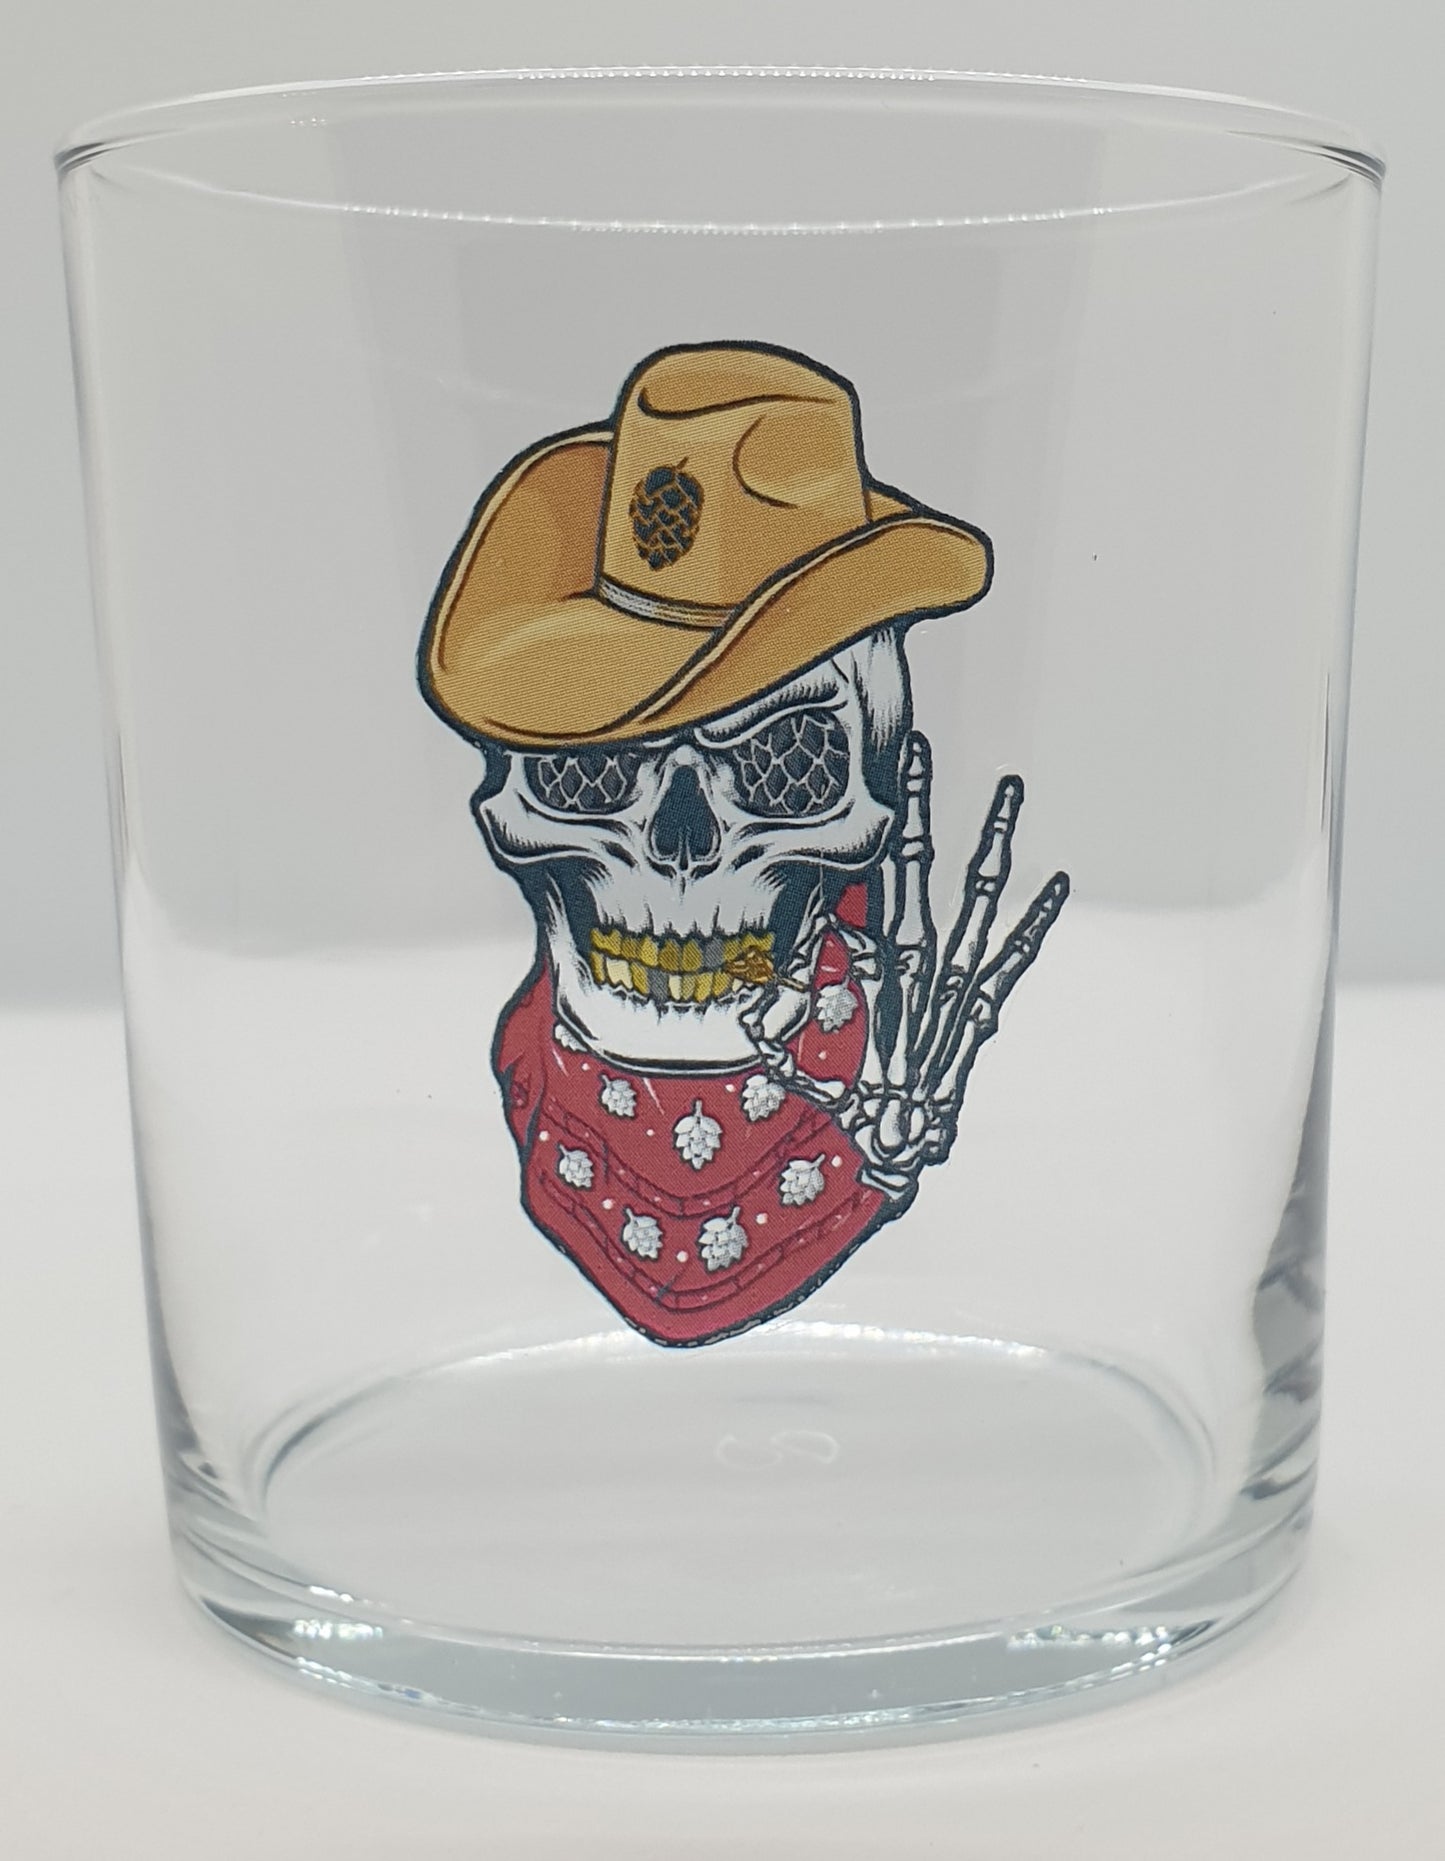 The Retired Cowboy Glassware